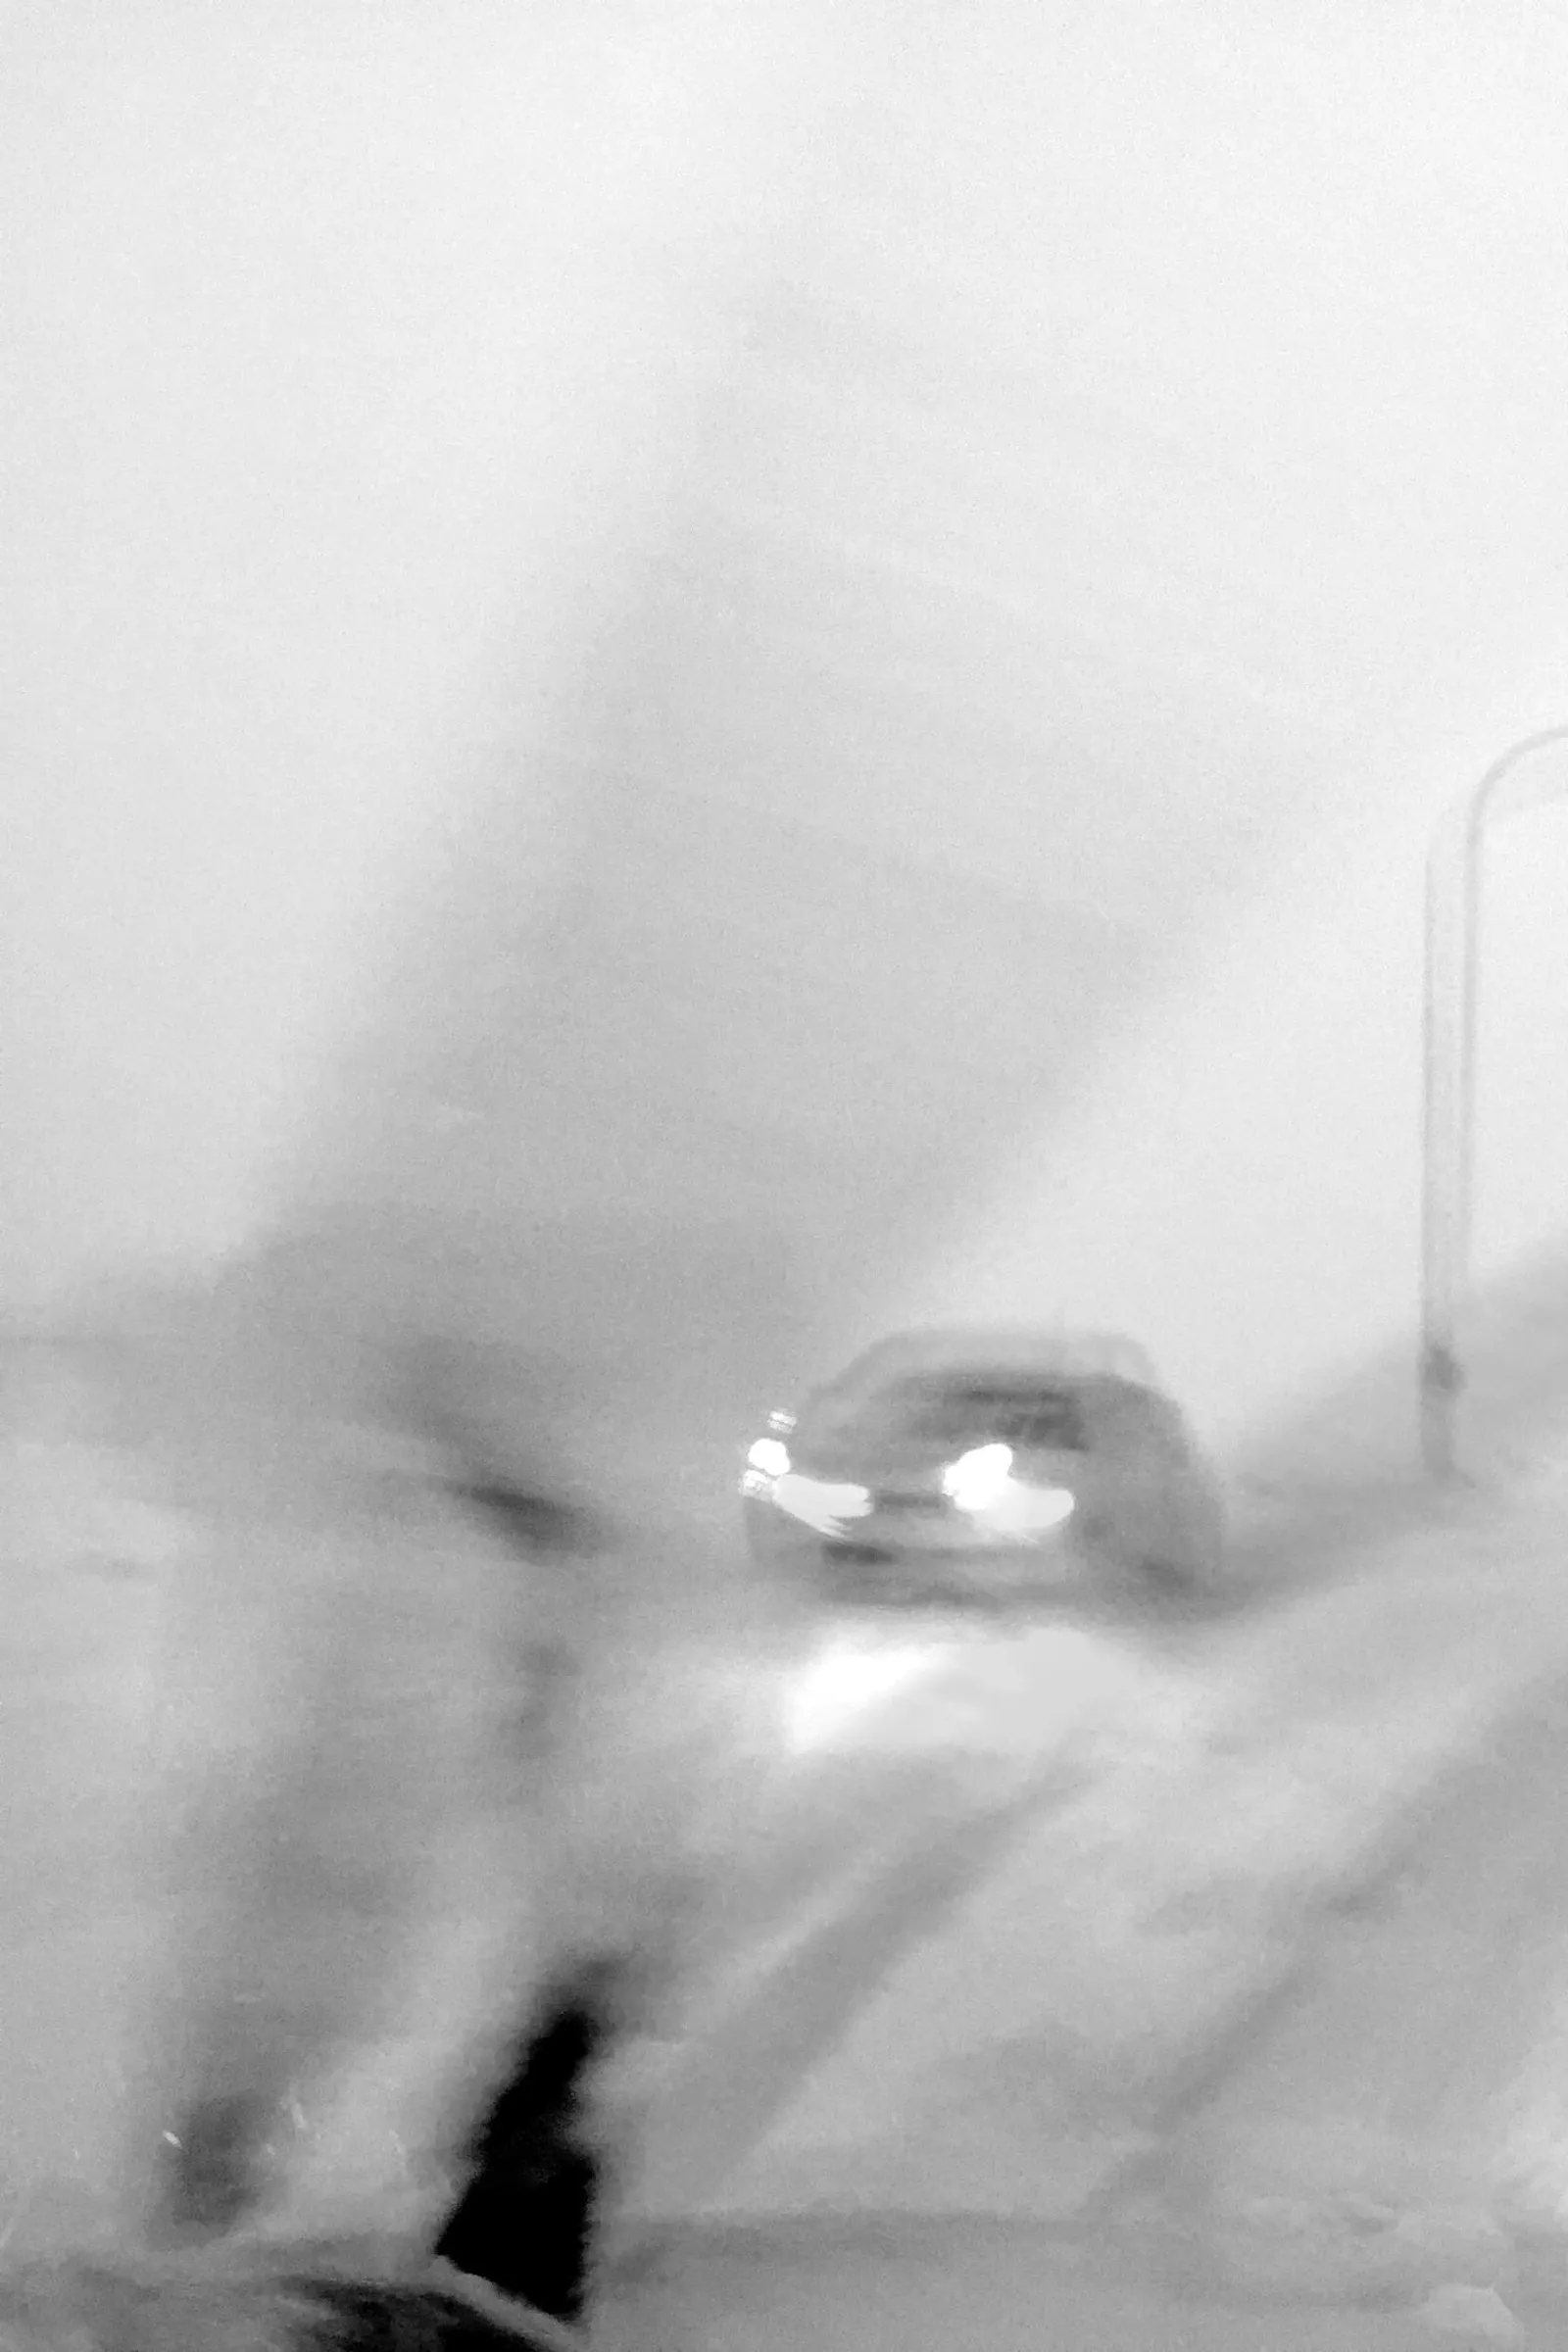 A blurry photo of cars driving through a snow storm